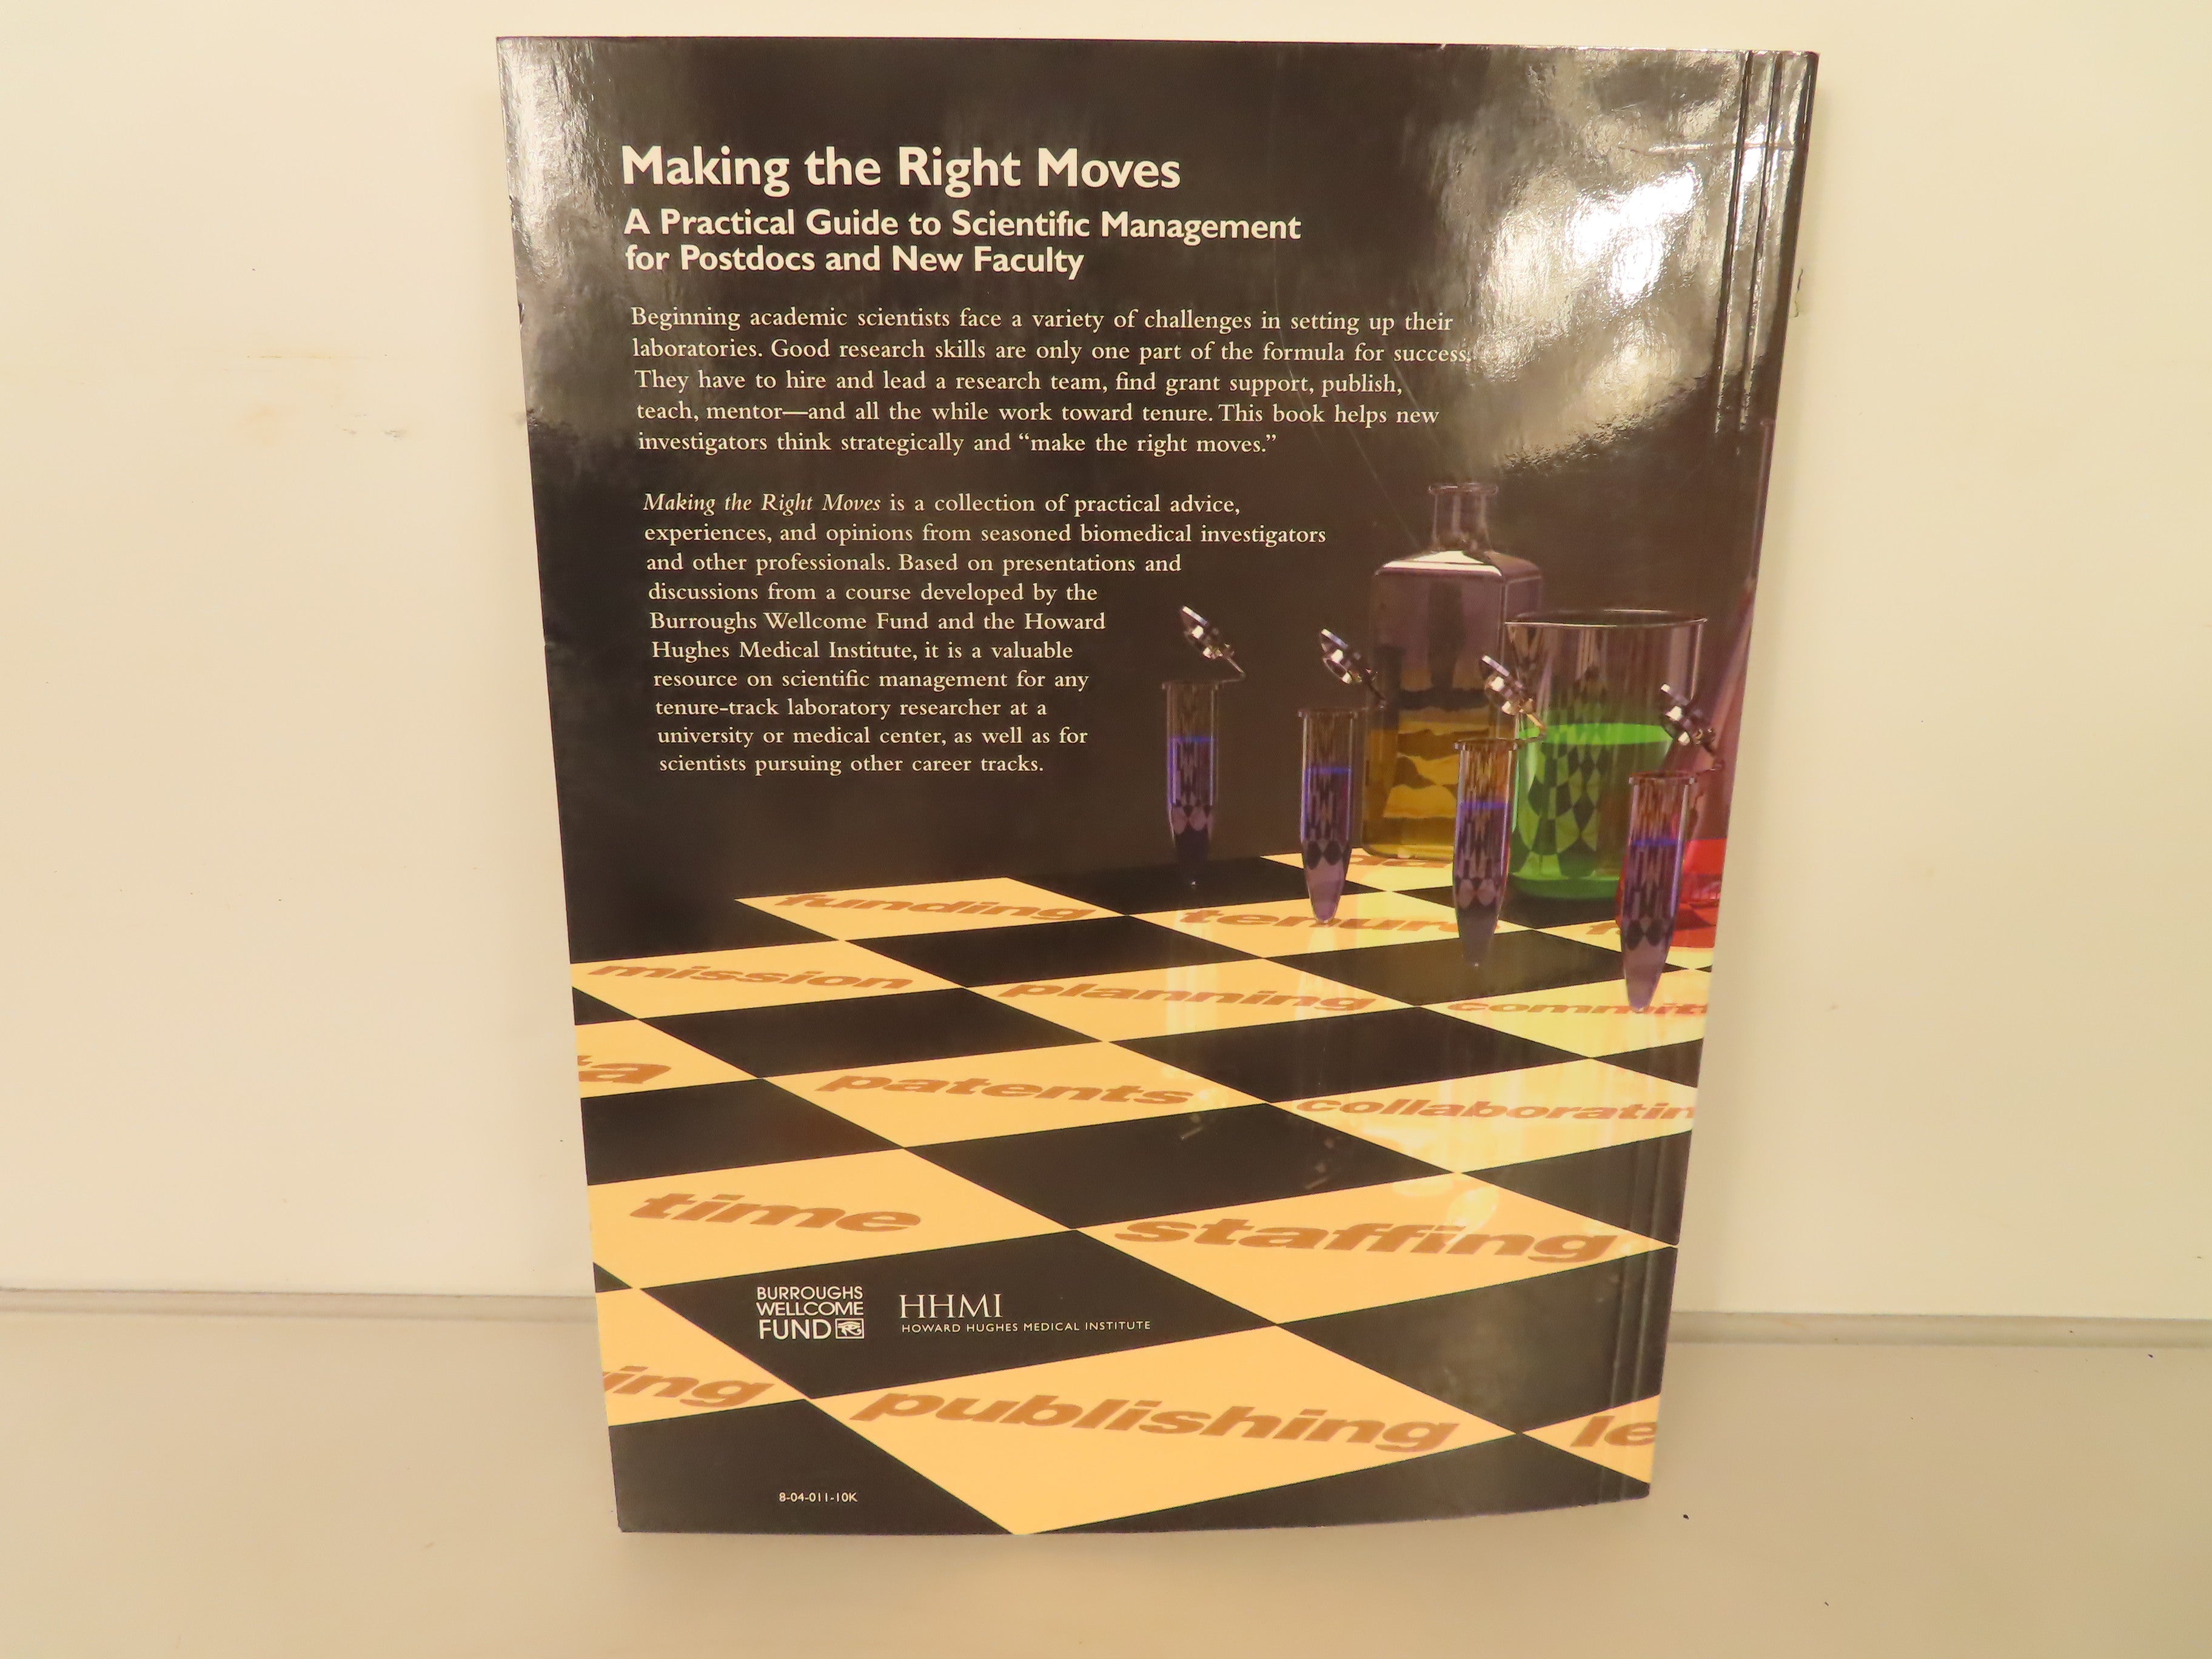 Making the Right Moves A Practical Guide to Scientific Management for Postdocs and New Faculty 2004